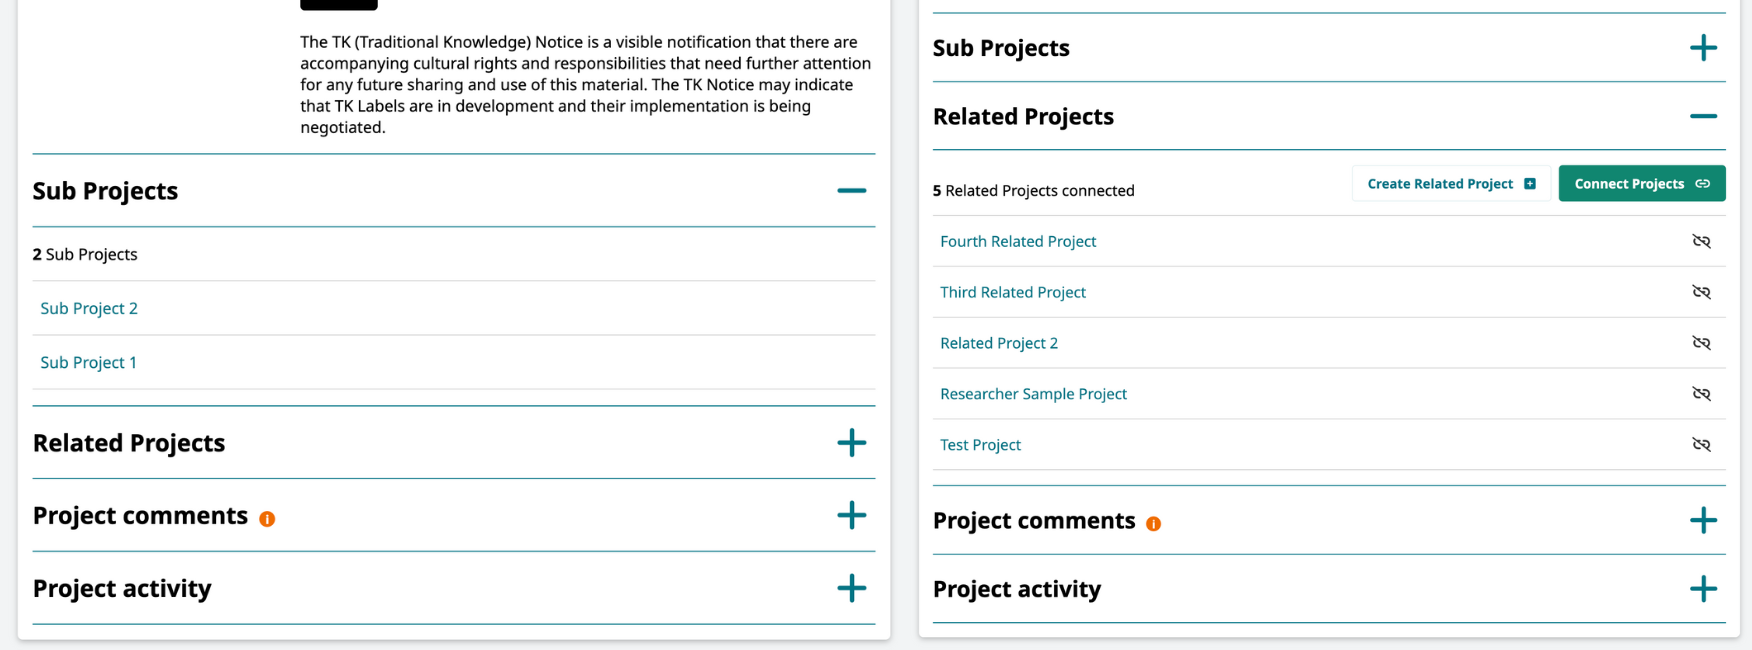 Composite of screenshots of the Local Contexts Hub showing the Sub Projects and Related Projects section of the Project page.